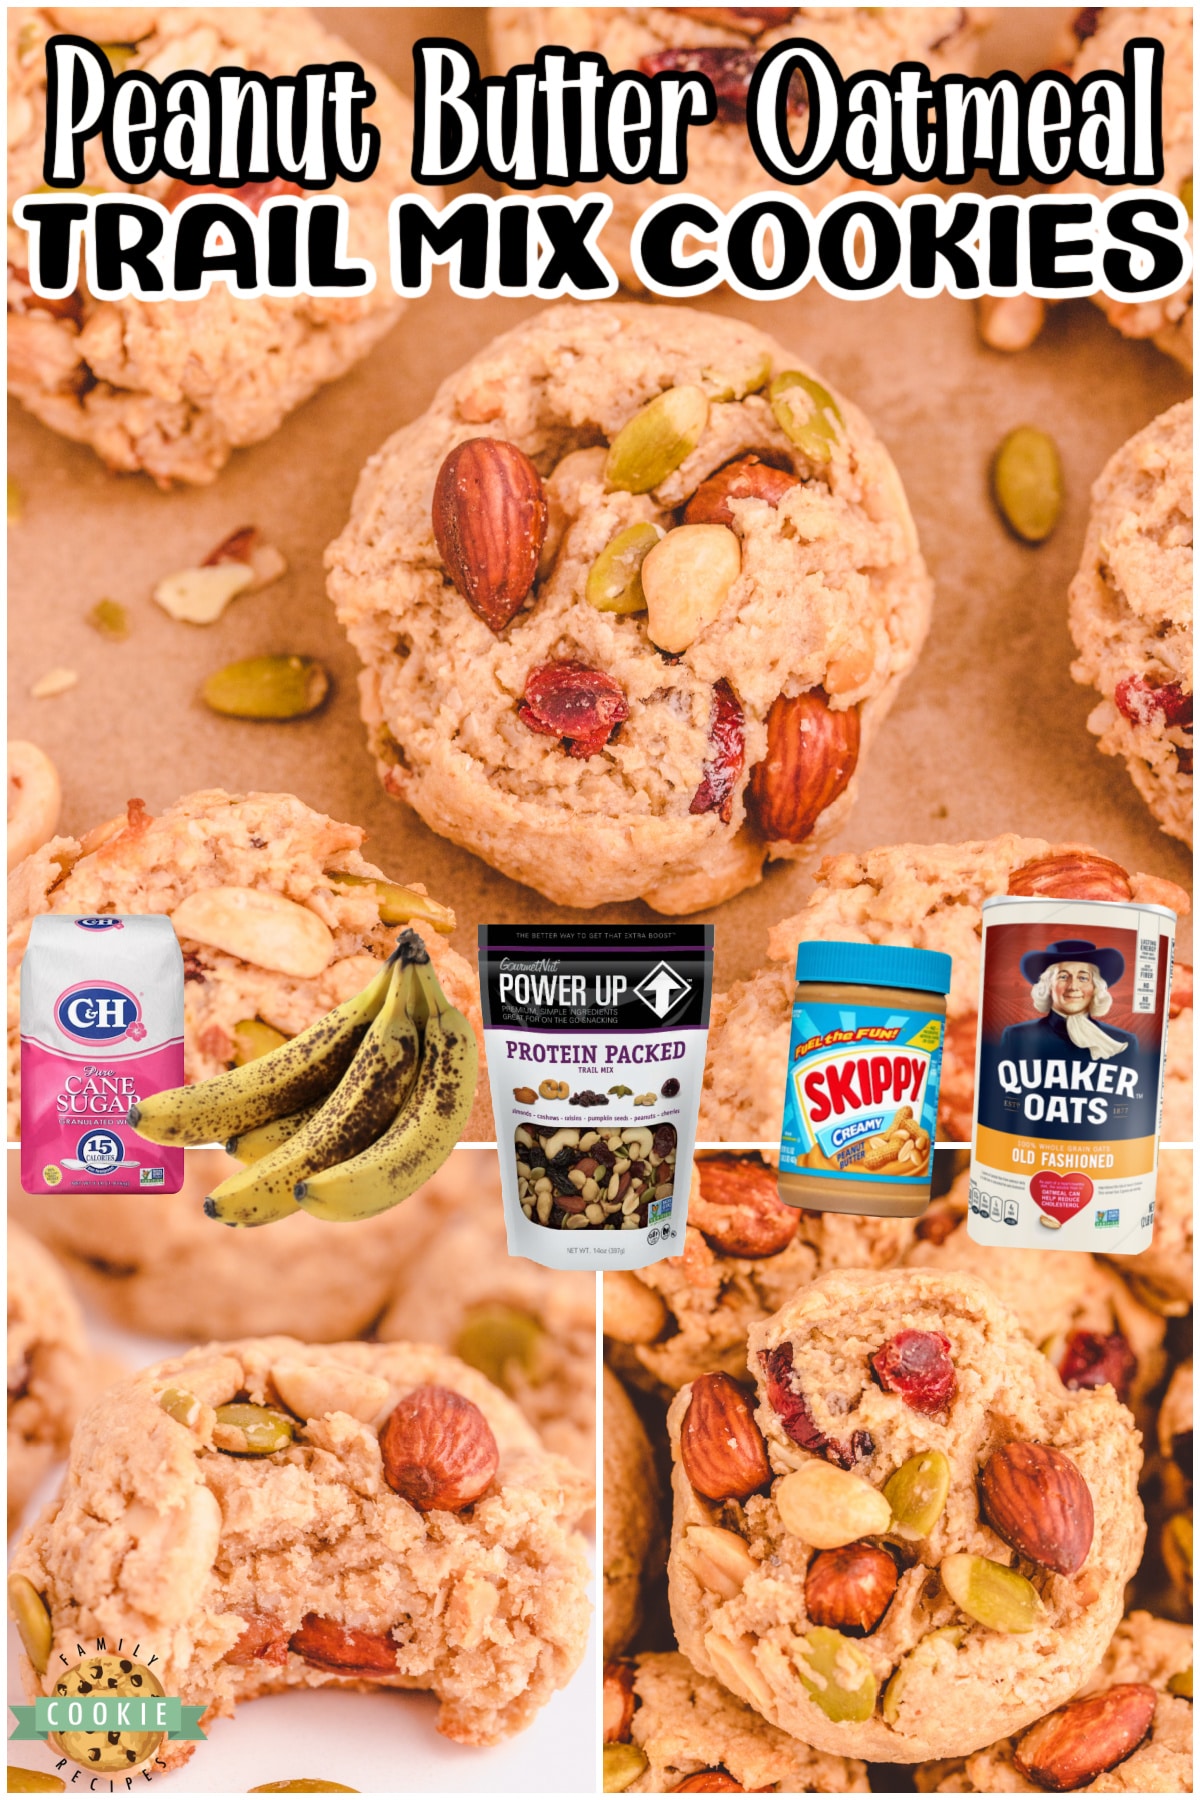 Trail Mix Peanut Butter Cookies are unique, delicious cookies perfect for breakfast or a snack! Trail Mix Cookies made with a variety of nuts, a banana & peanut butter curb your sweet tooth & give a nice energy boost at the same time! 